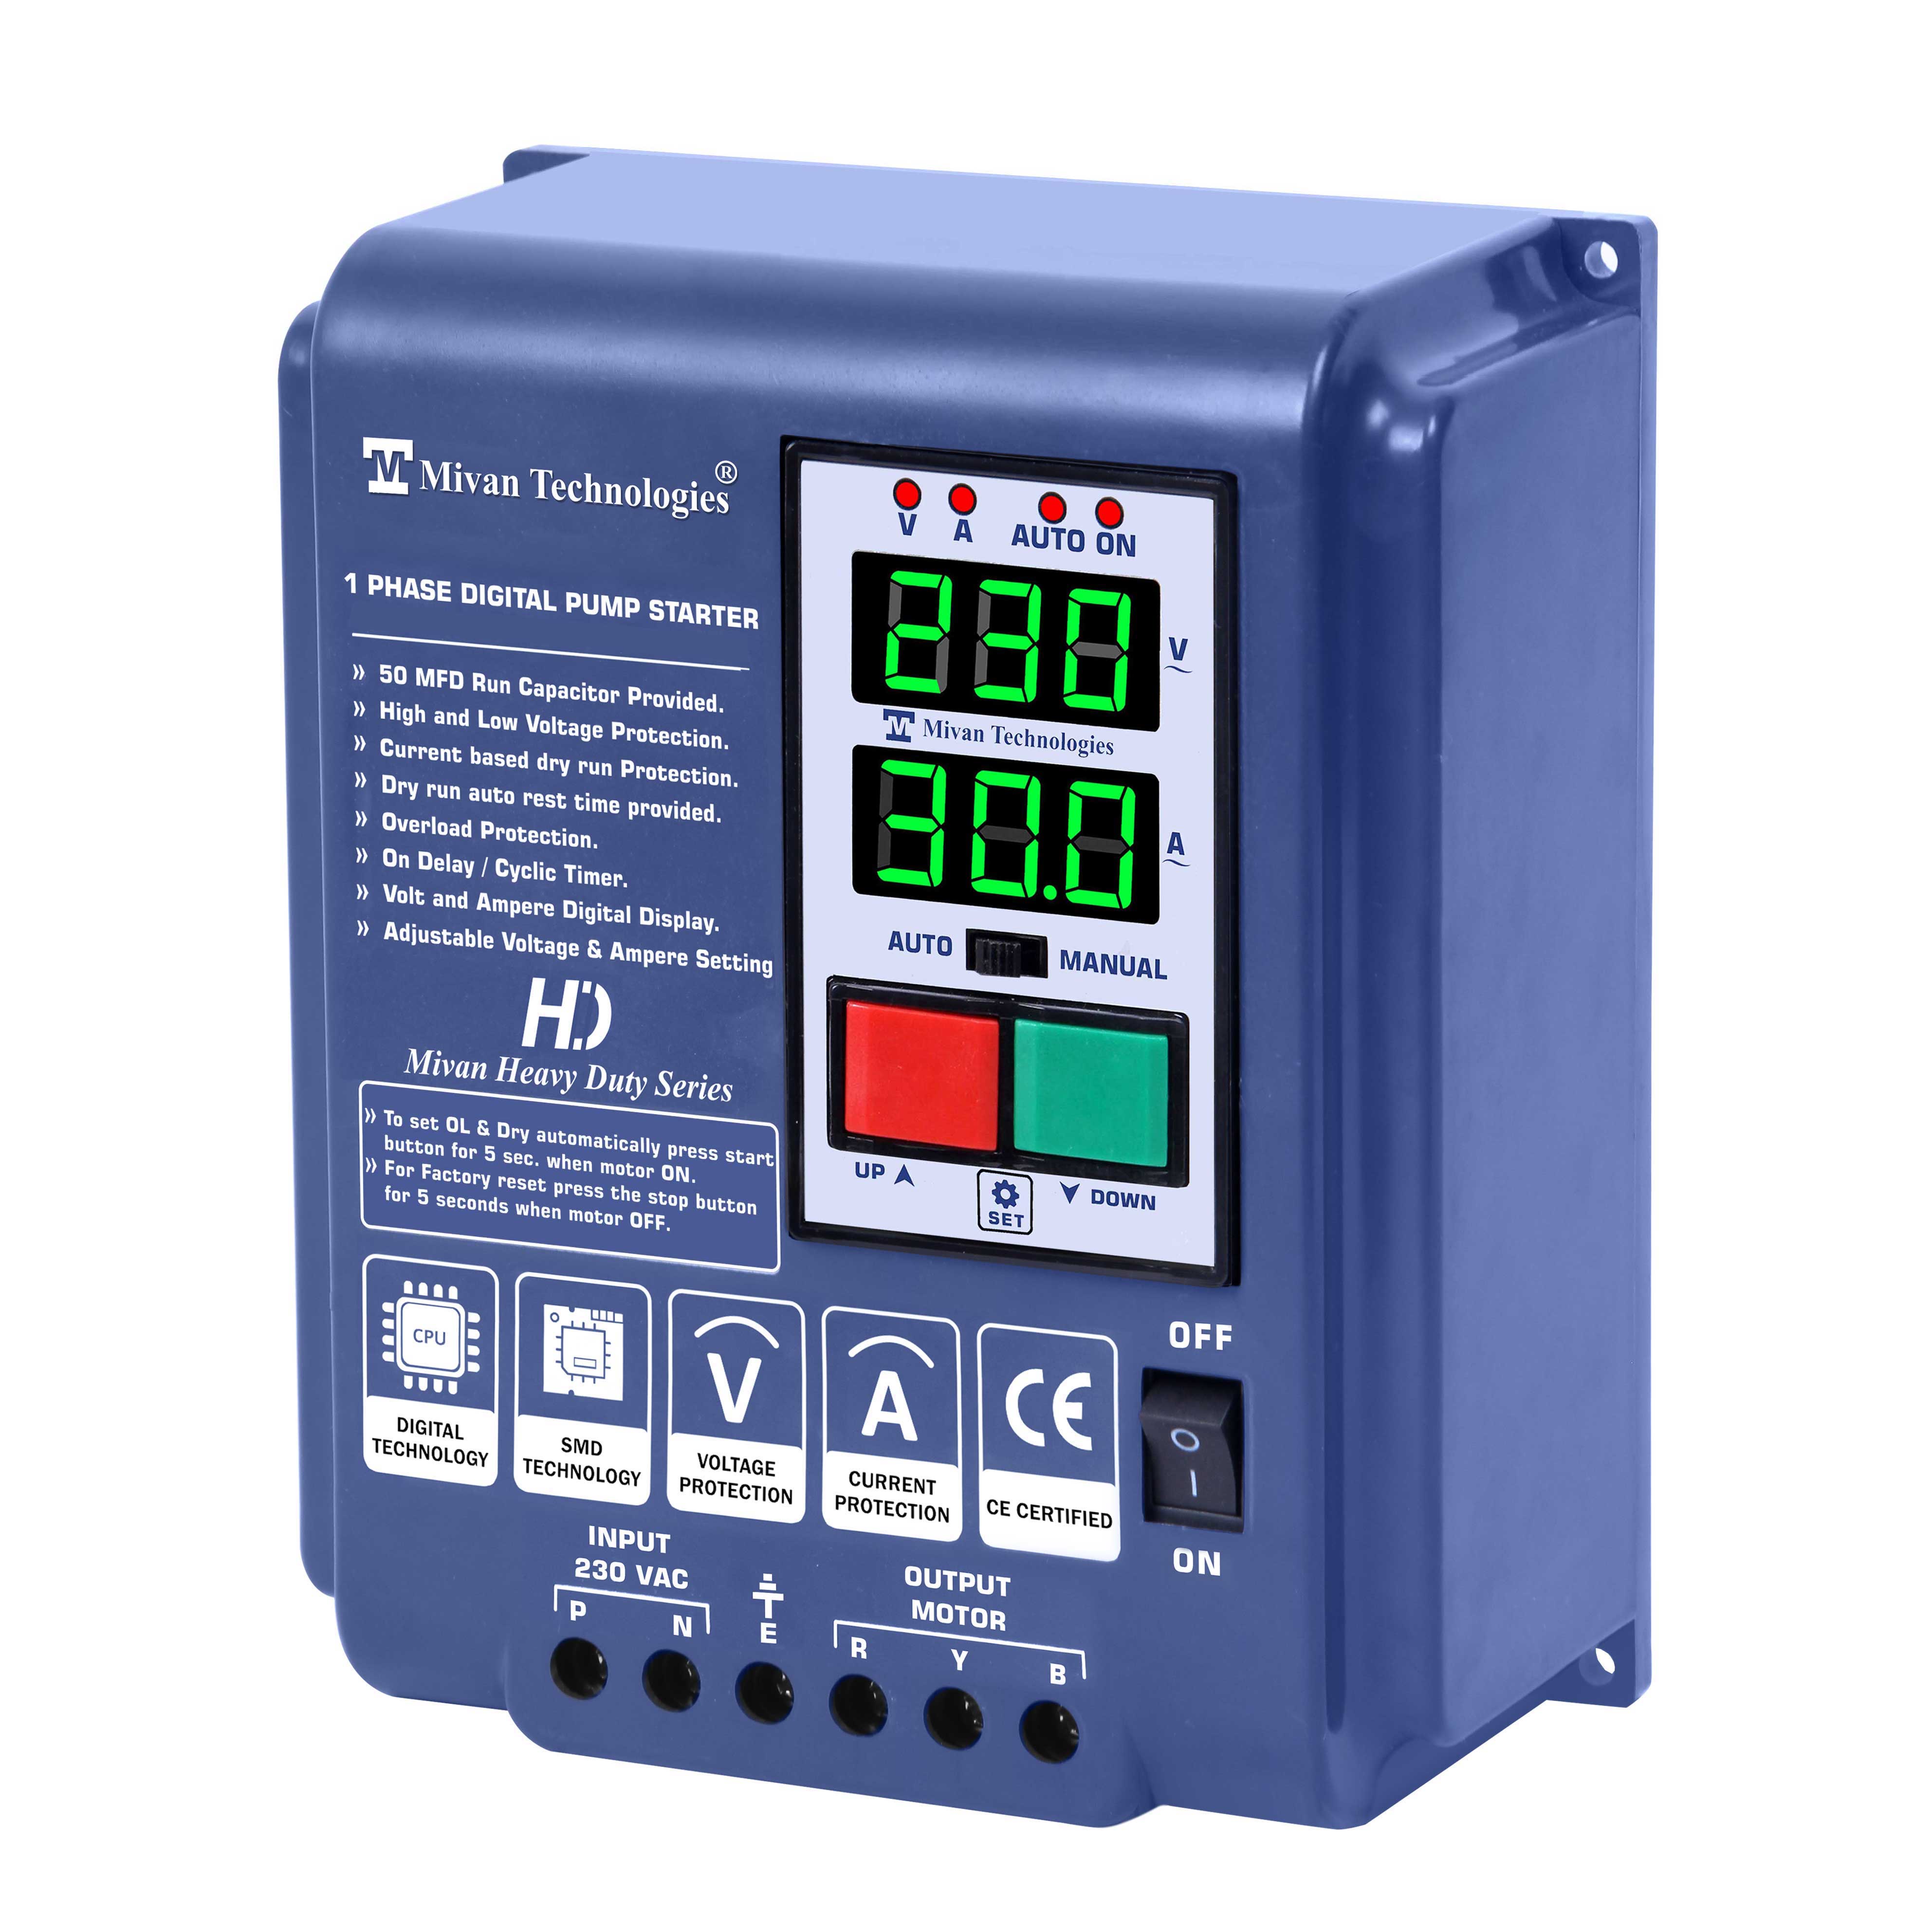 DS R Single phase Digital motor starter panel with volt and amp meter with HV LV OL DRY protection cyc timer on and off delay timer